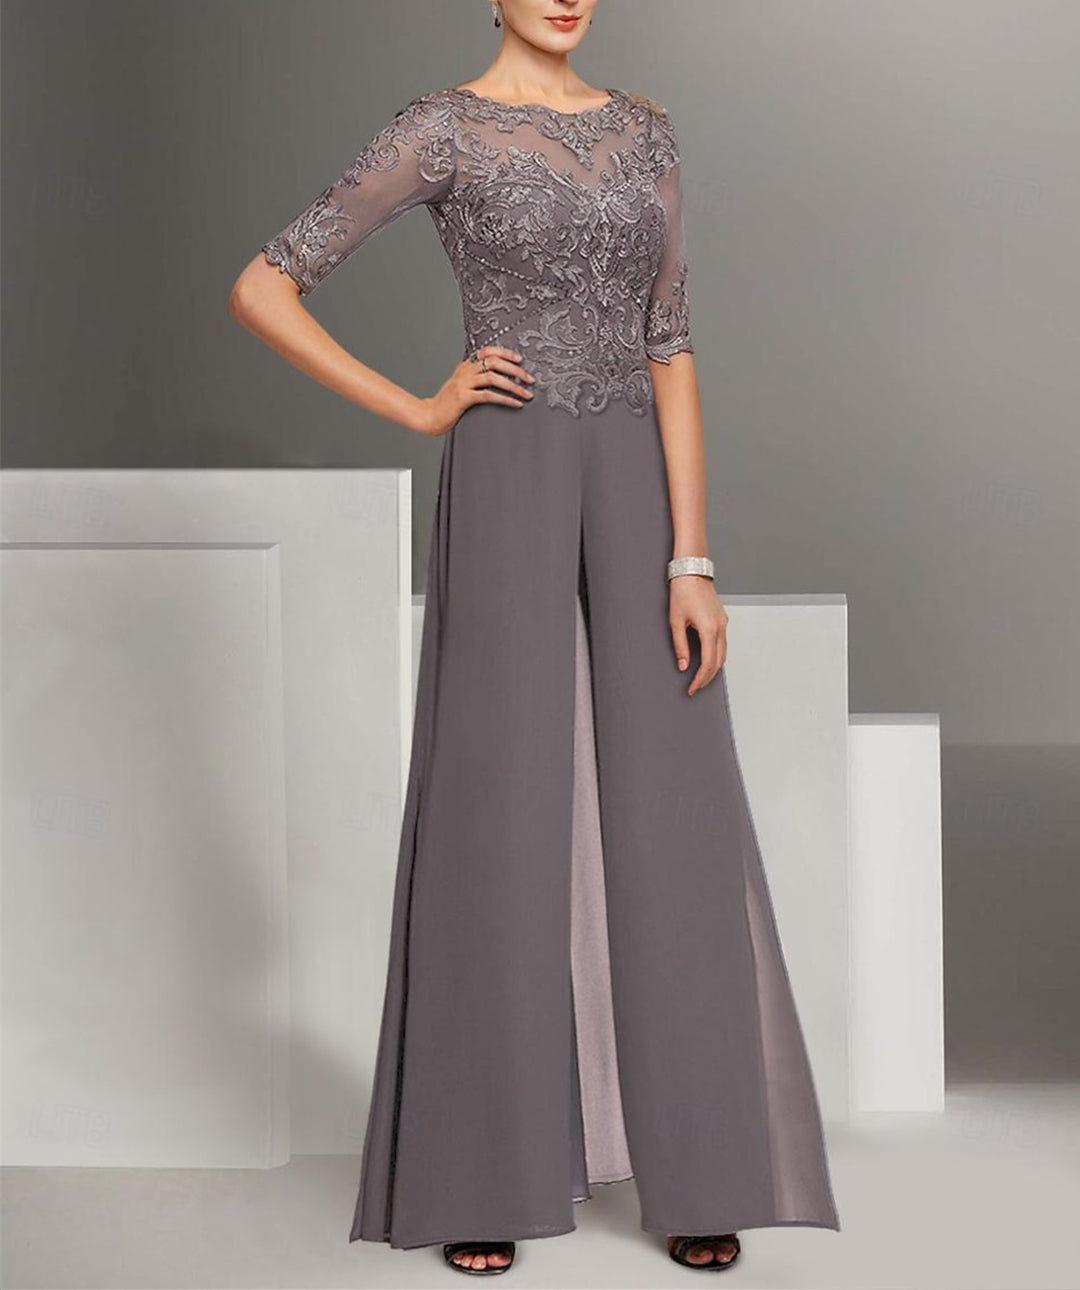 Chiffon half Sleeves Mother of the Bride Pantsuits with Lace